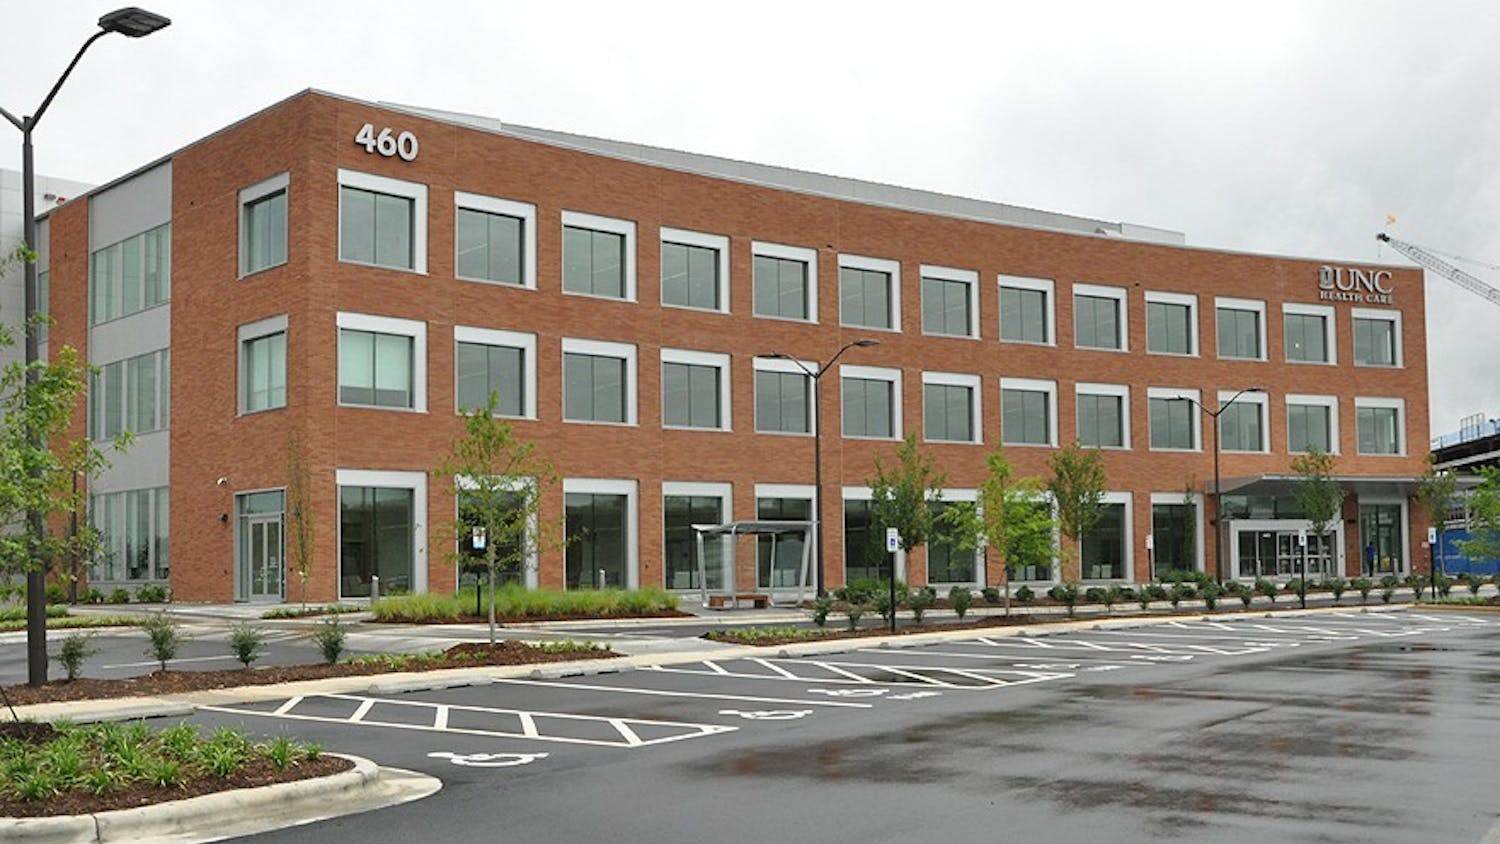 The newly opened wing of UNC Hospitals located in Hillsborough